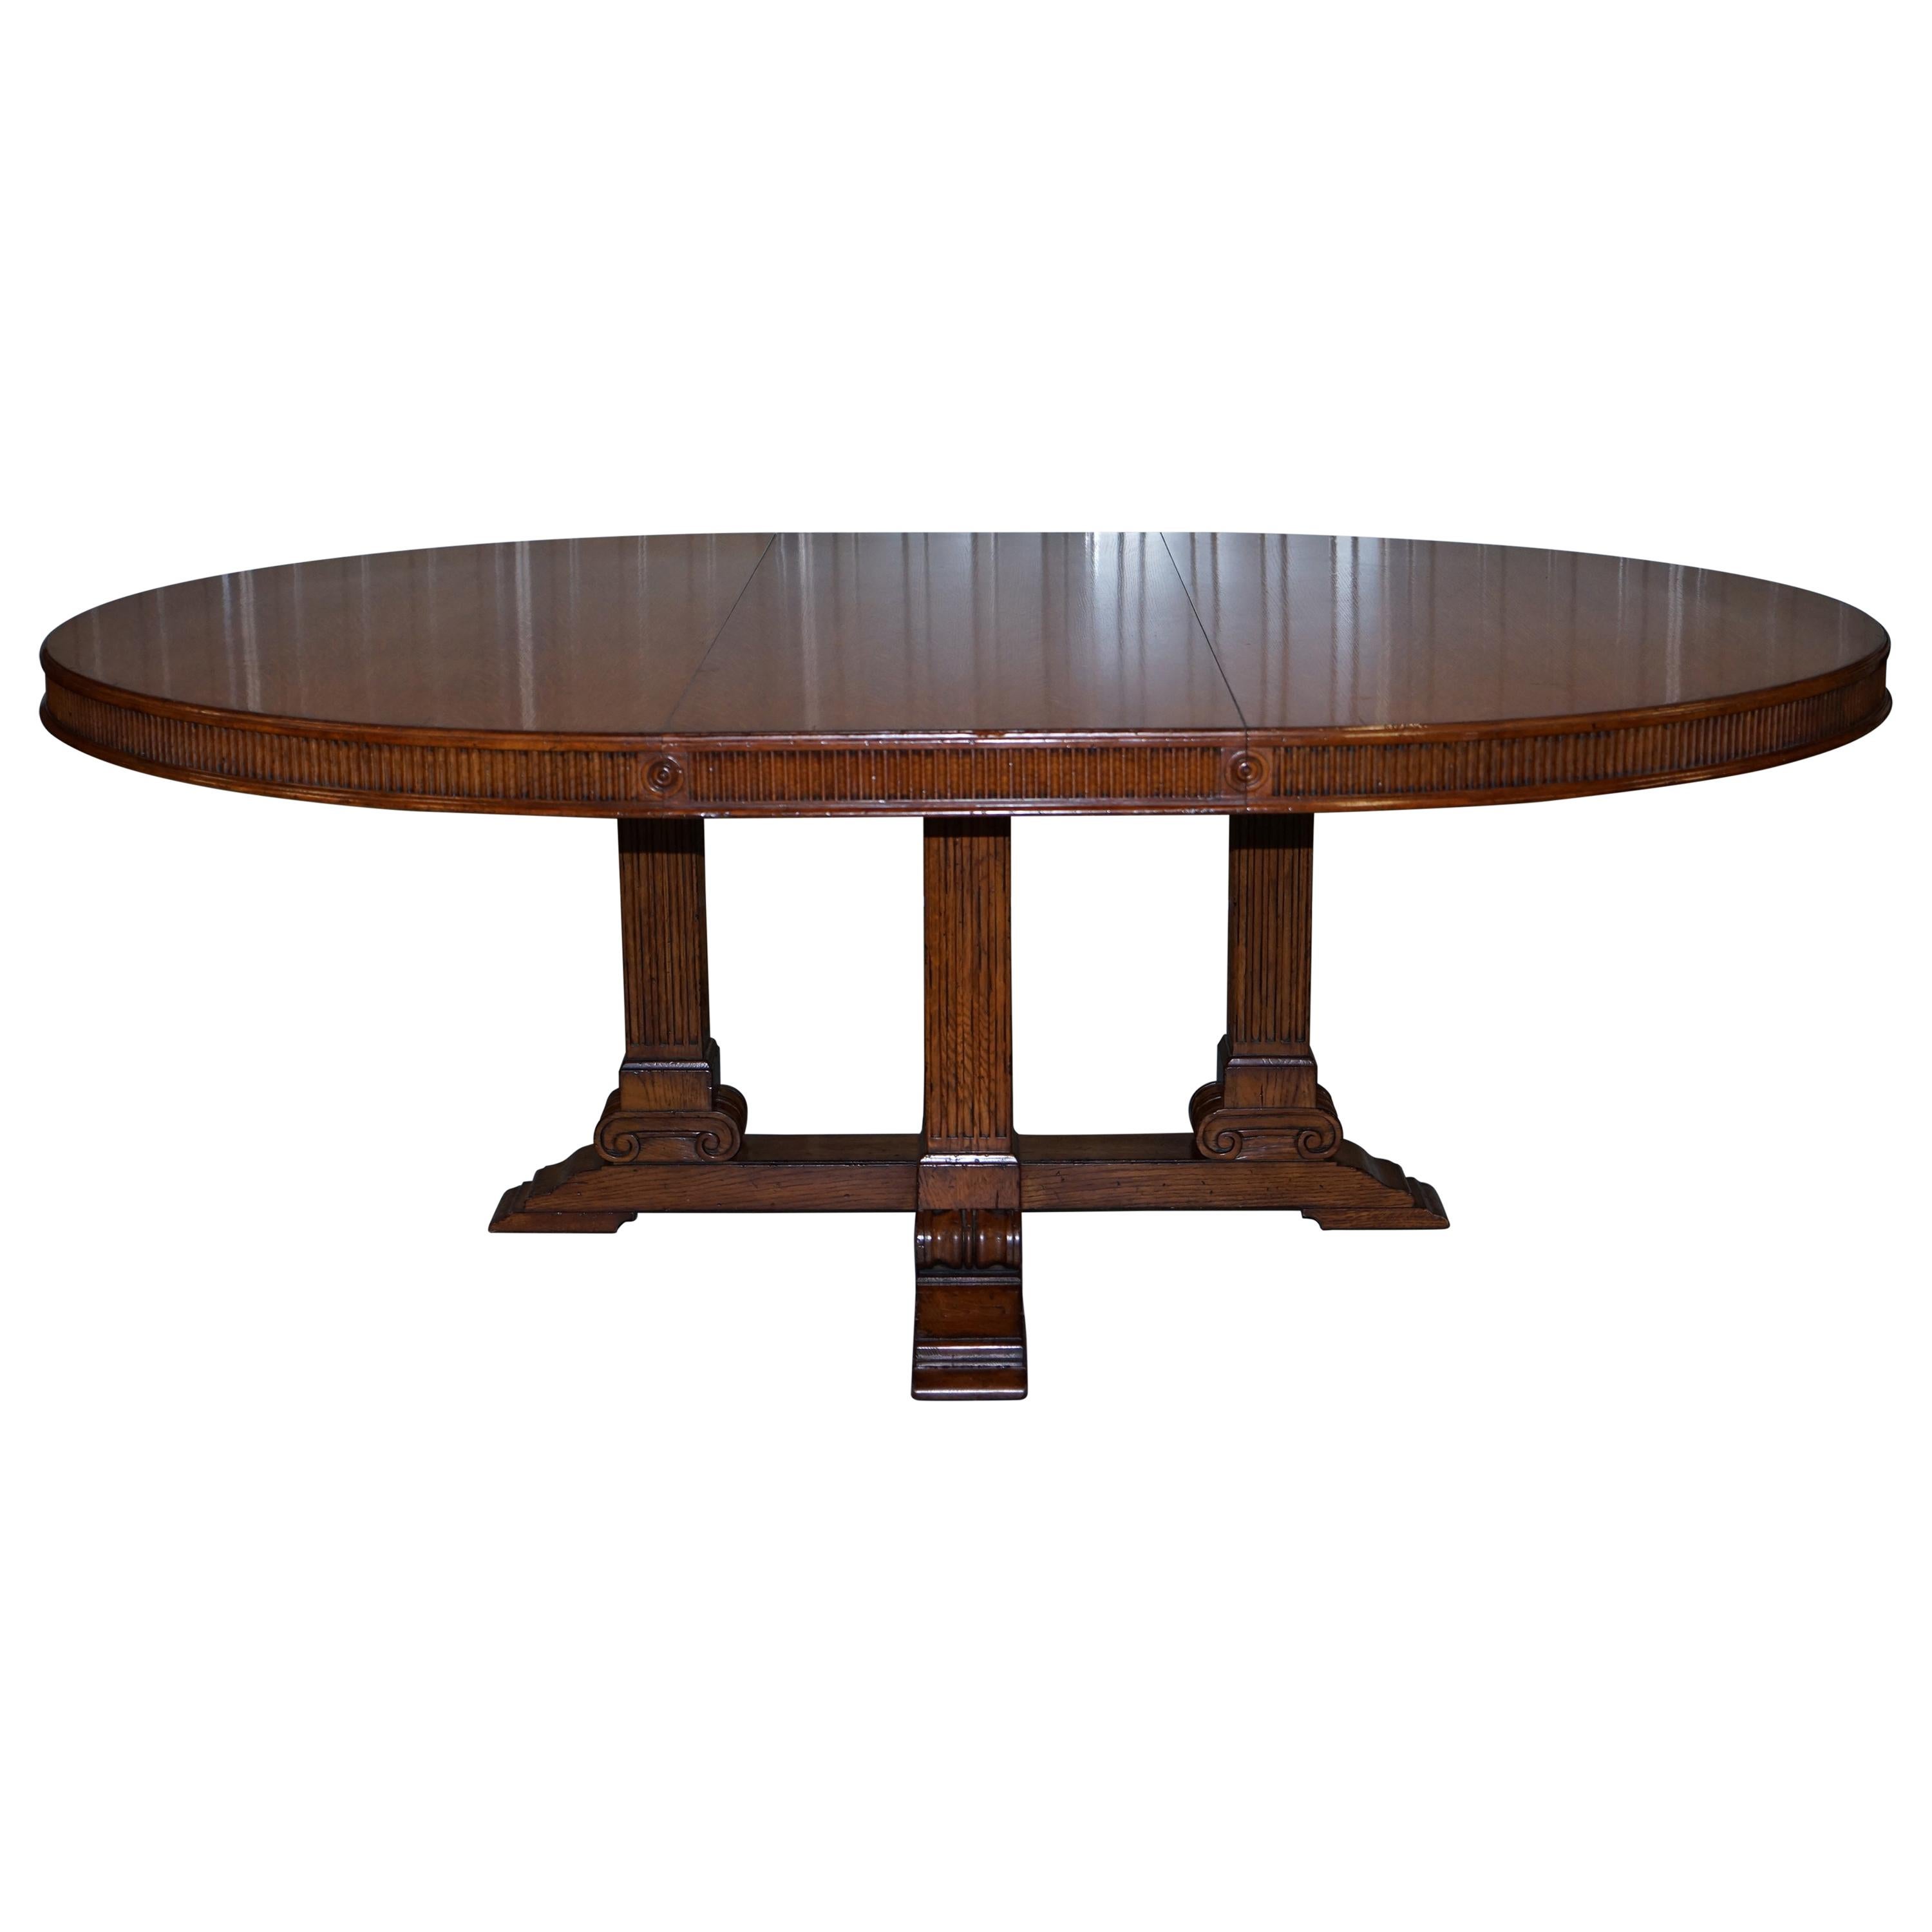 Ralph Lauren Hither Hills 6 10 Person Oval Extending Dining Table For Sale At 1stdibs